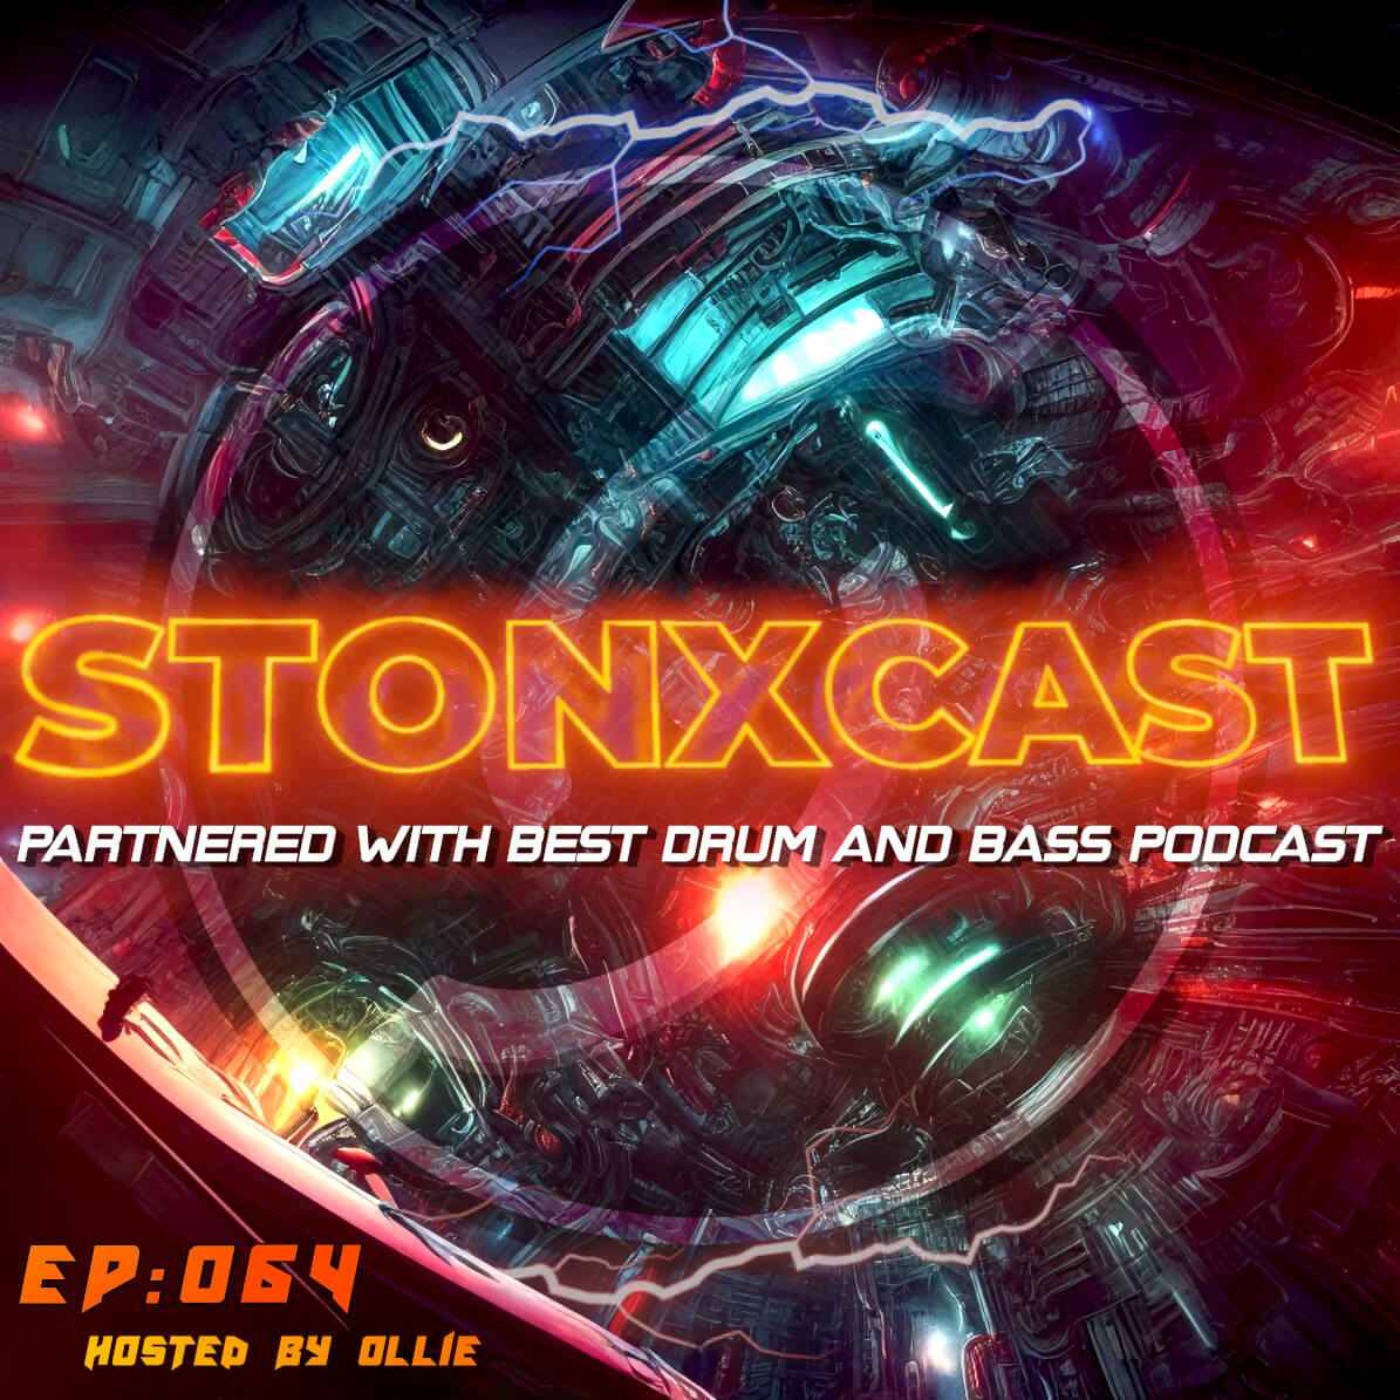 Stonxcast EP:064 - Hosted by Ollie Artwork